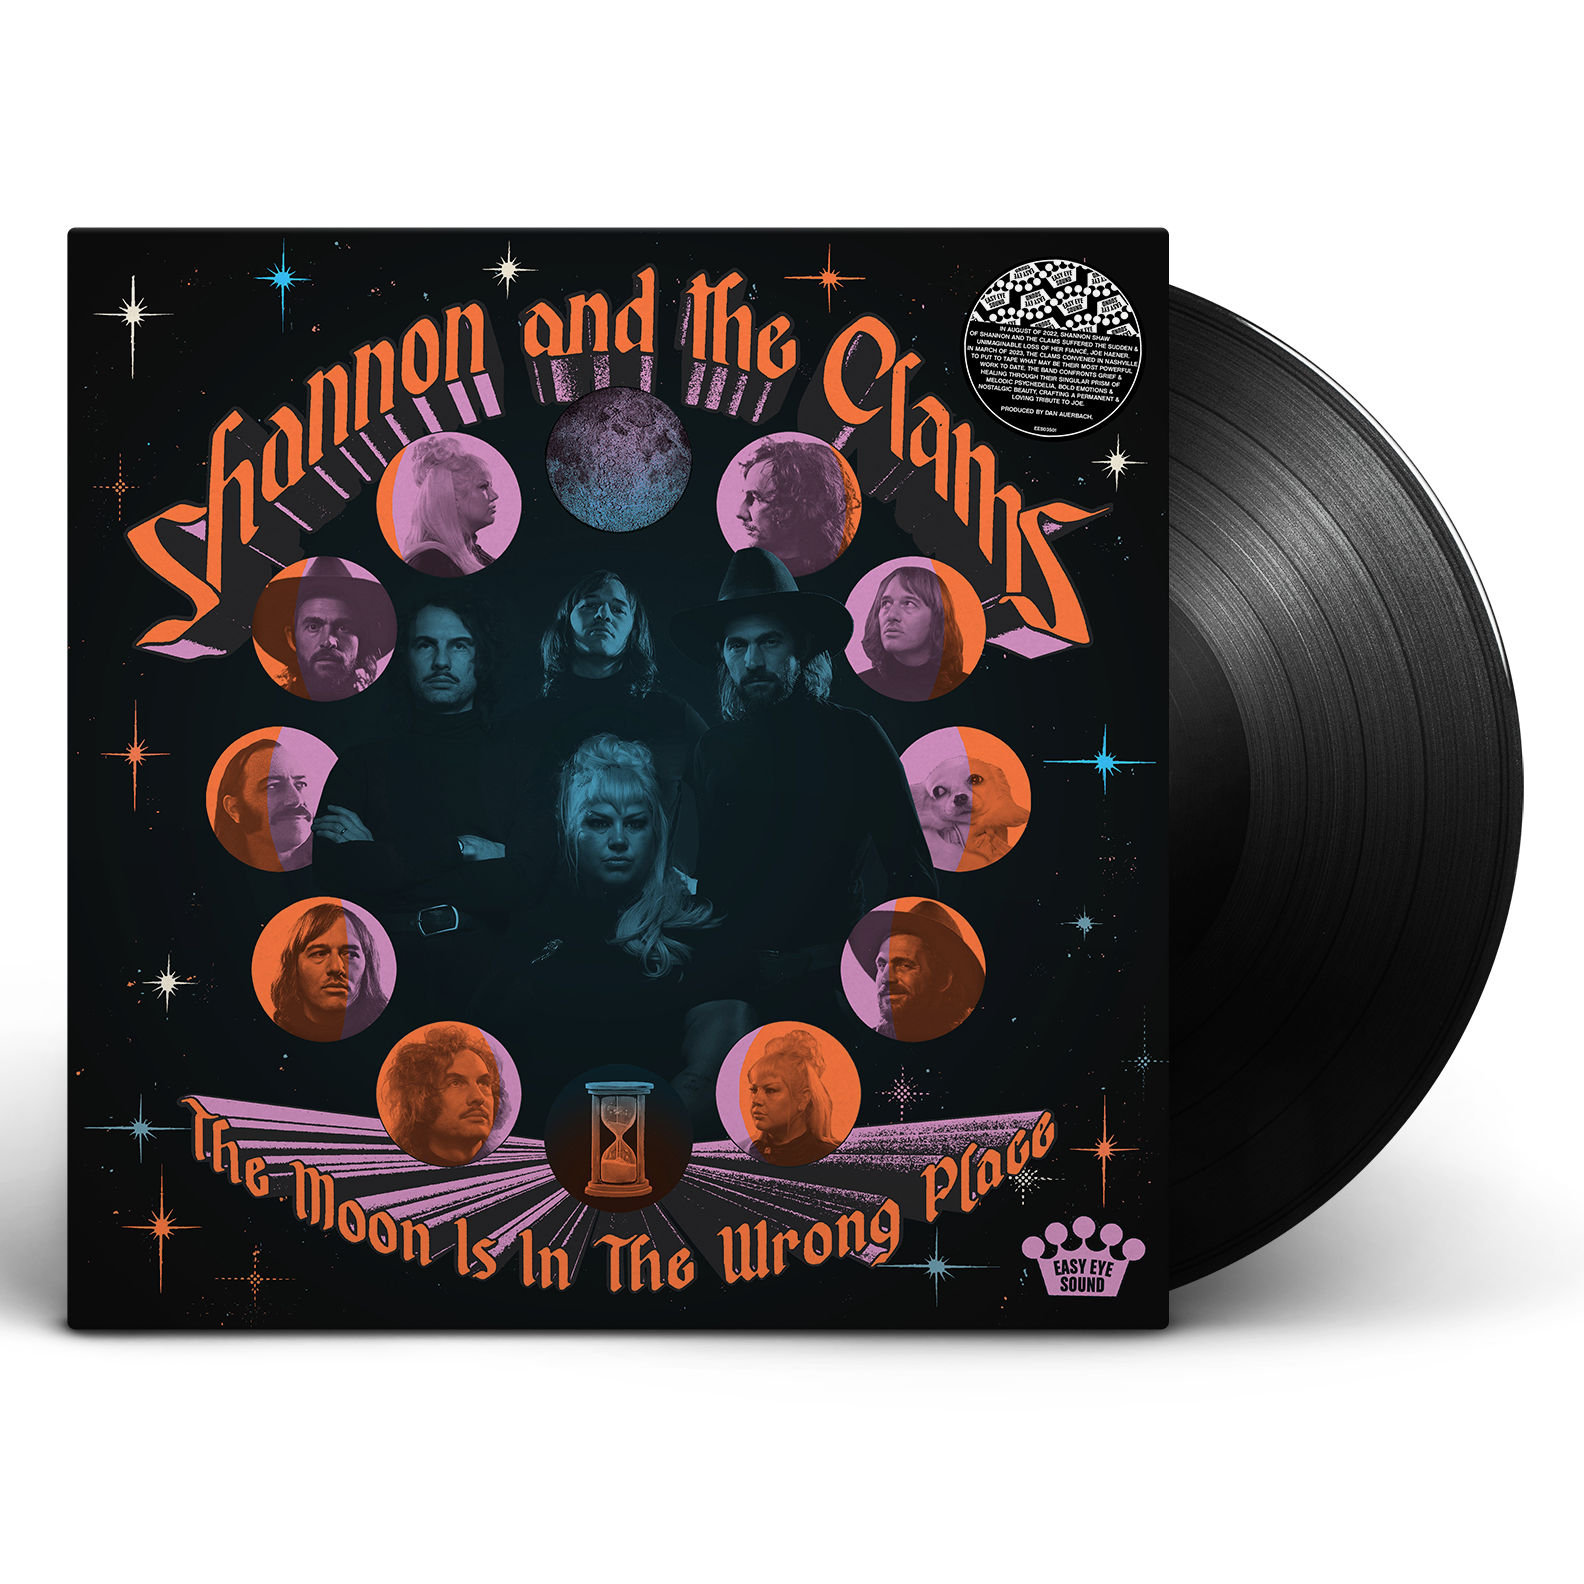 Shannon & The Clams – The Moon Is In The Wrong Place [Vinyl